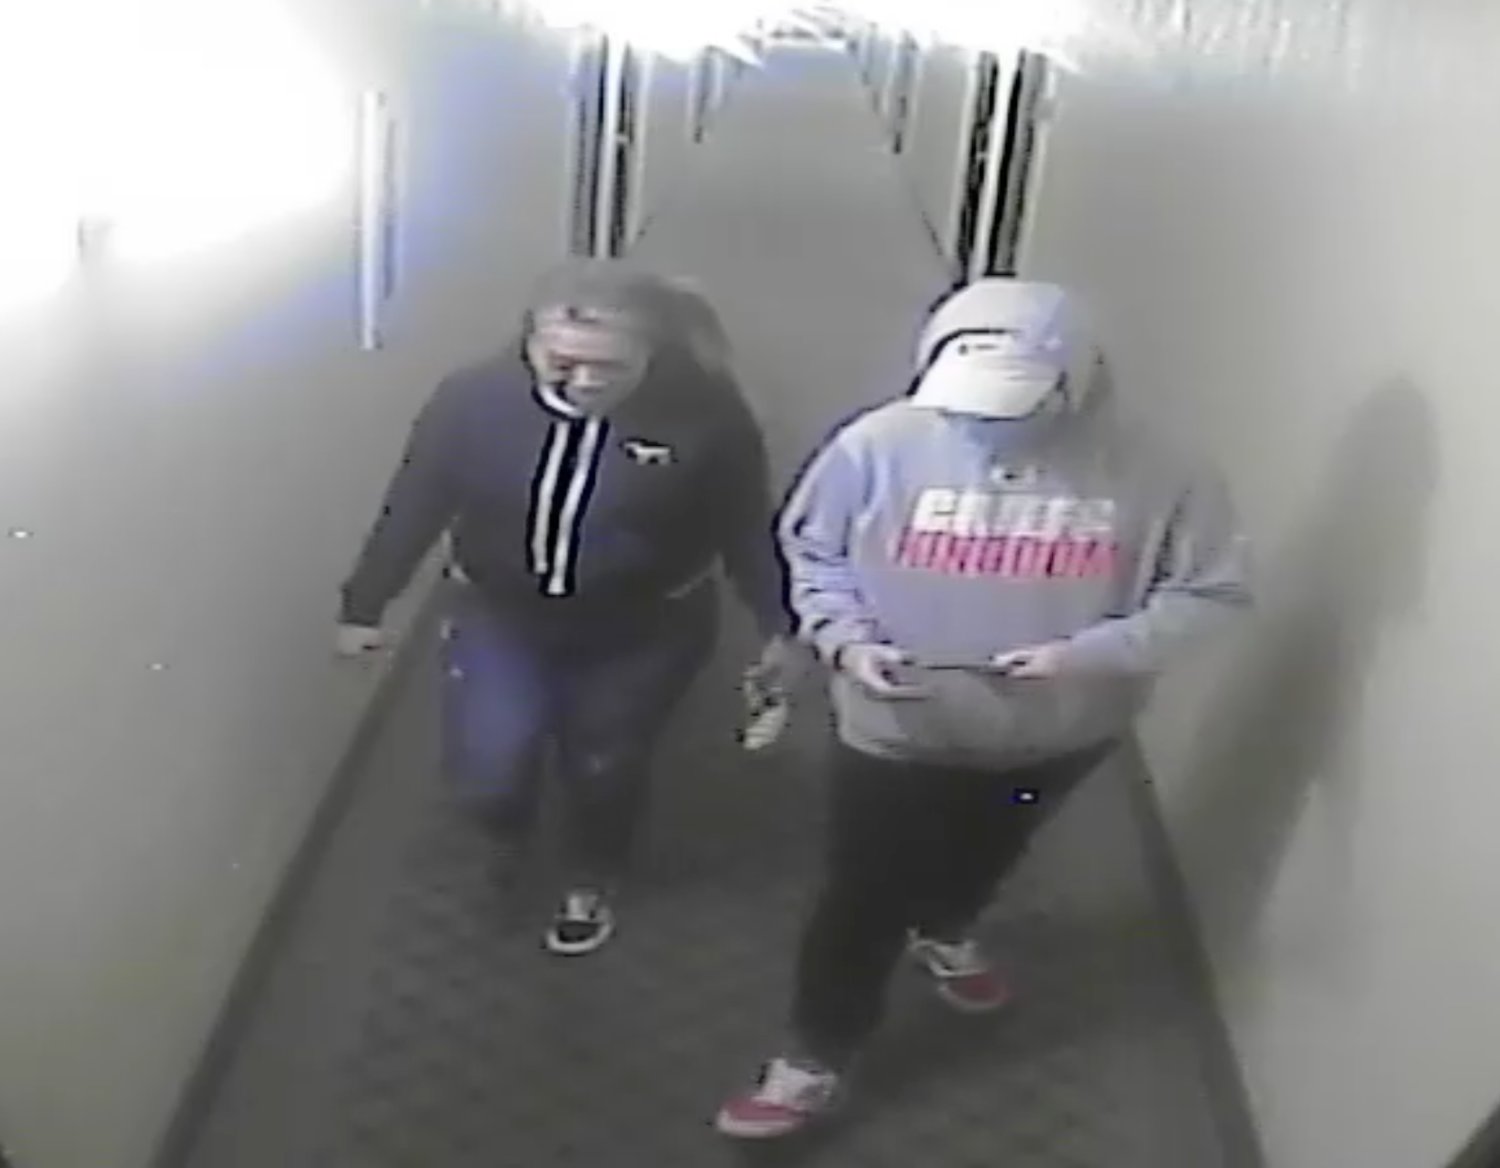 TWO SUSPECTS involved in the theft of cash in Nixa, as shown from a hallway surveillance camera at the Nixa Super 8 hotel.